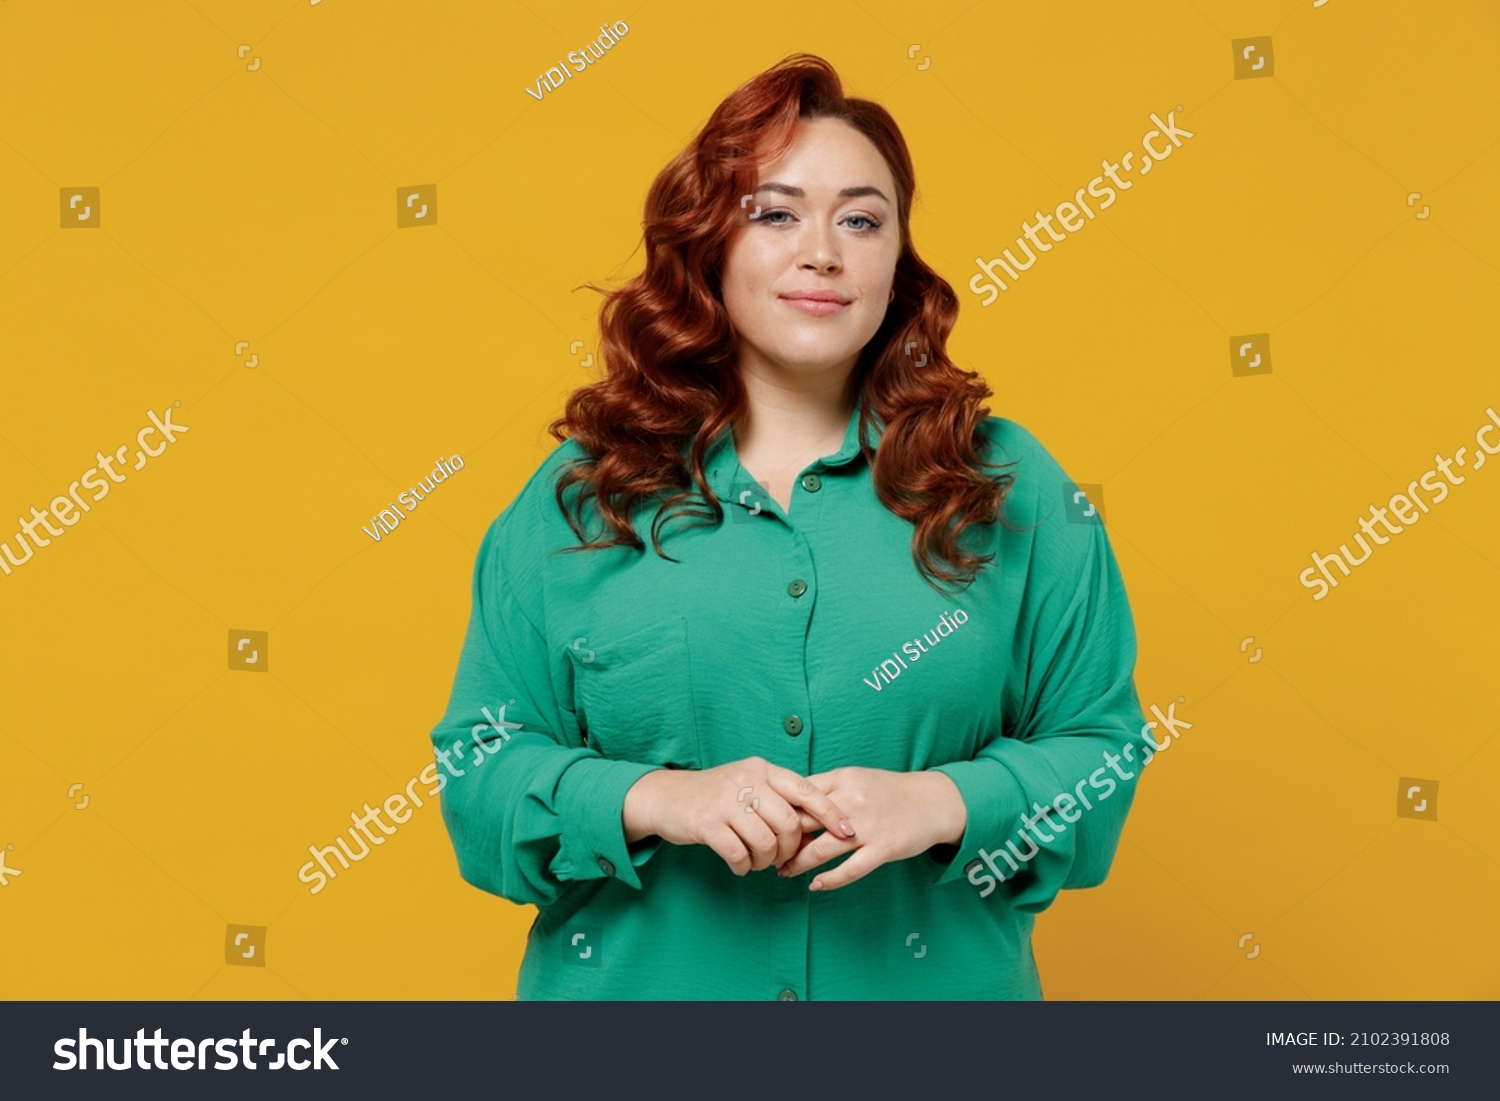 Charming bright happy young ginger chubby overweight woman 20s years old wears green shirt looking camera smiling isolated on plain yellow background studio portrait. People emotions lifestyle concept #2102391808